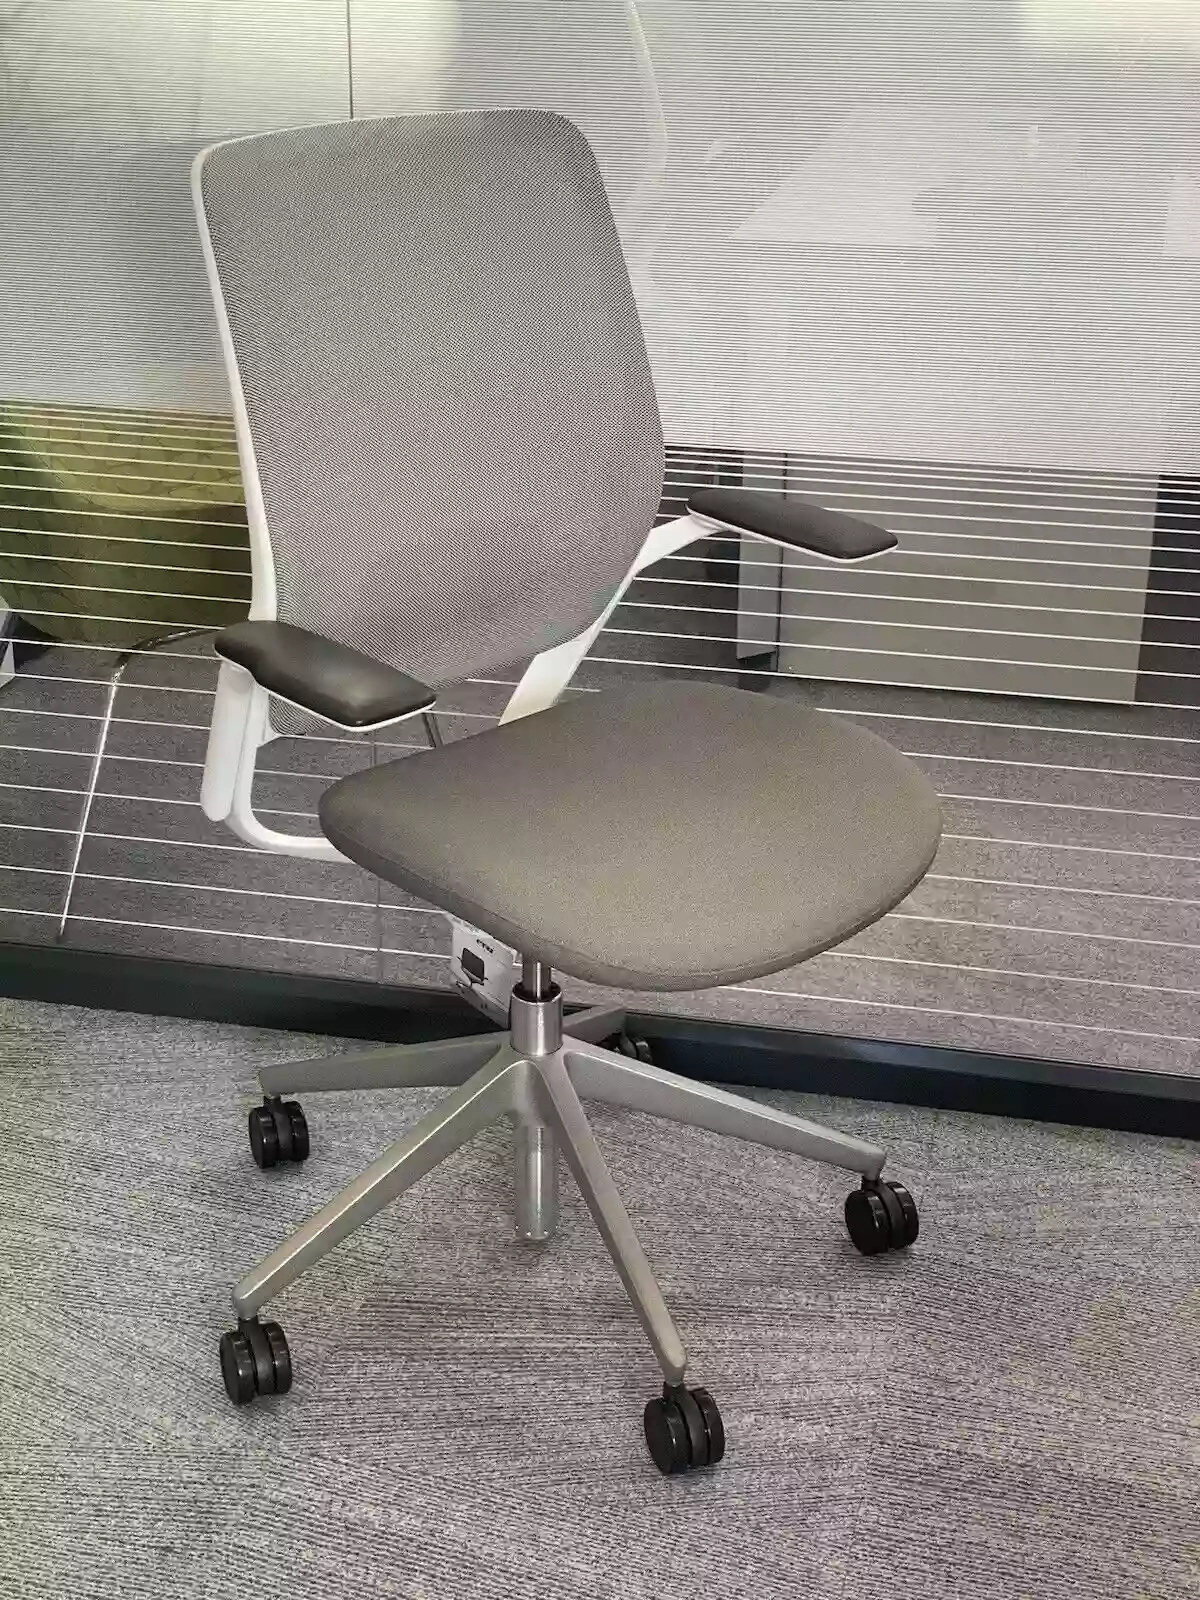 The Office Chair Man